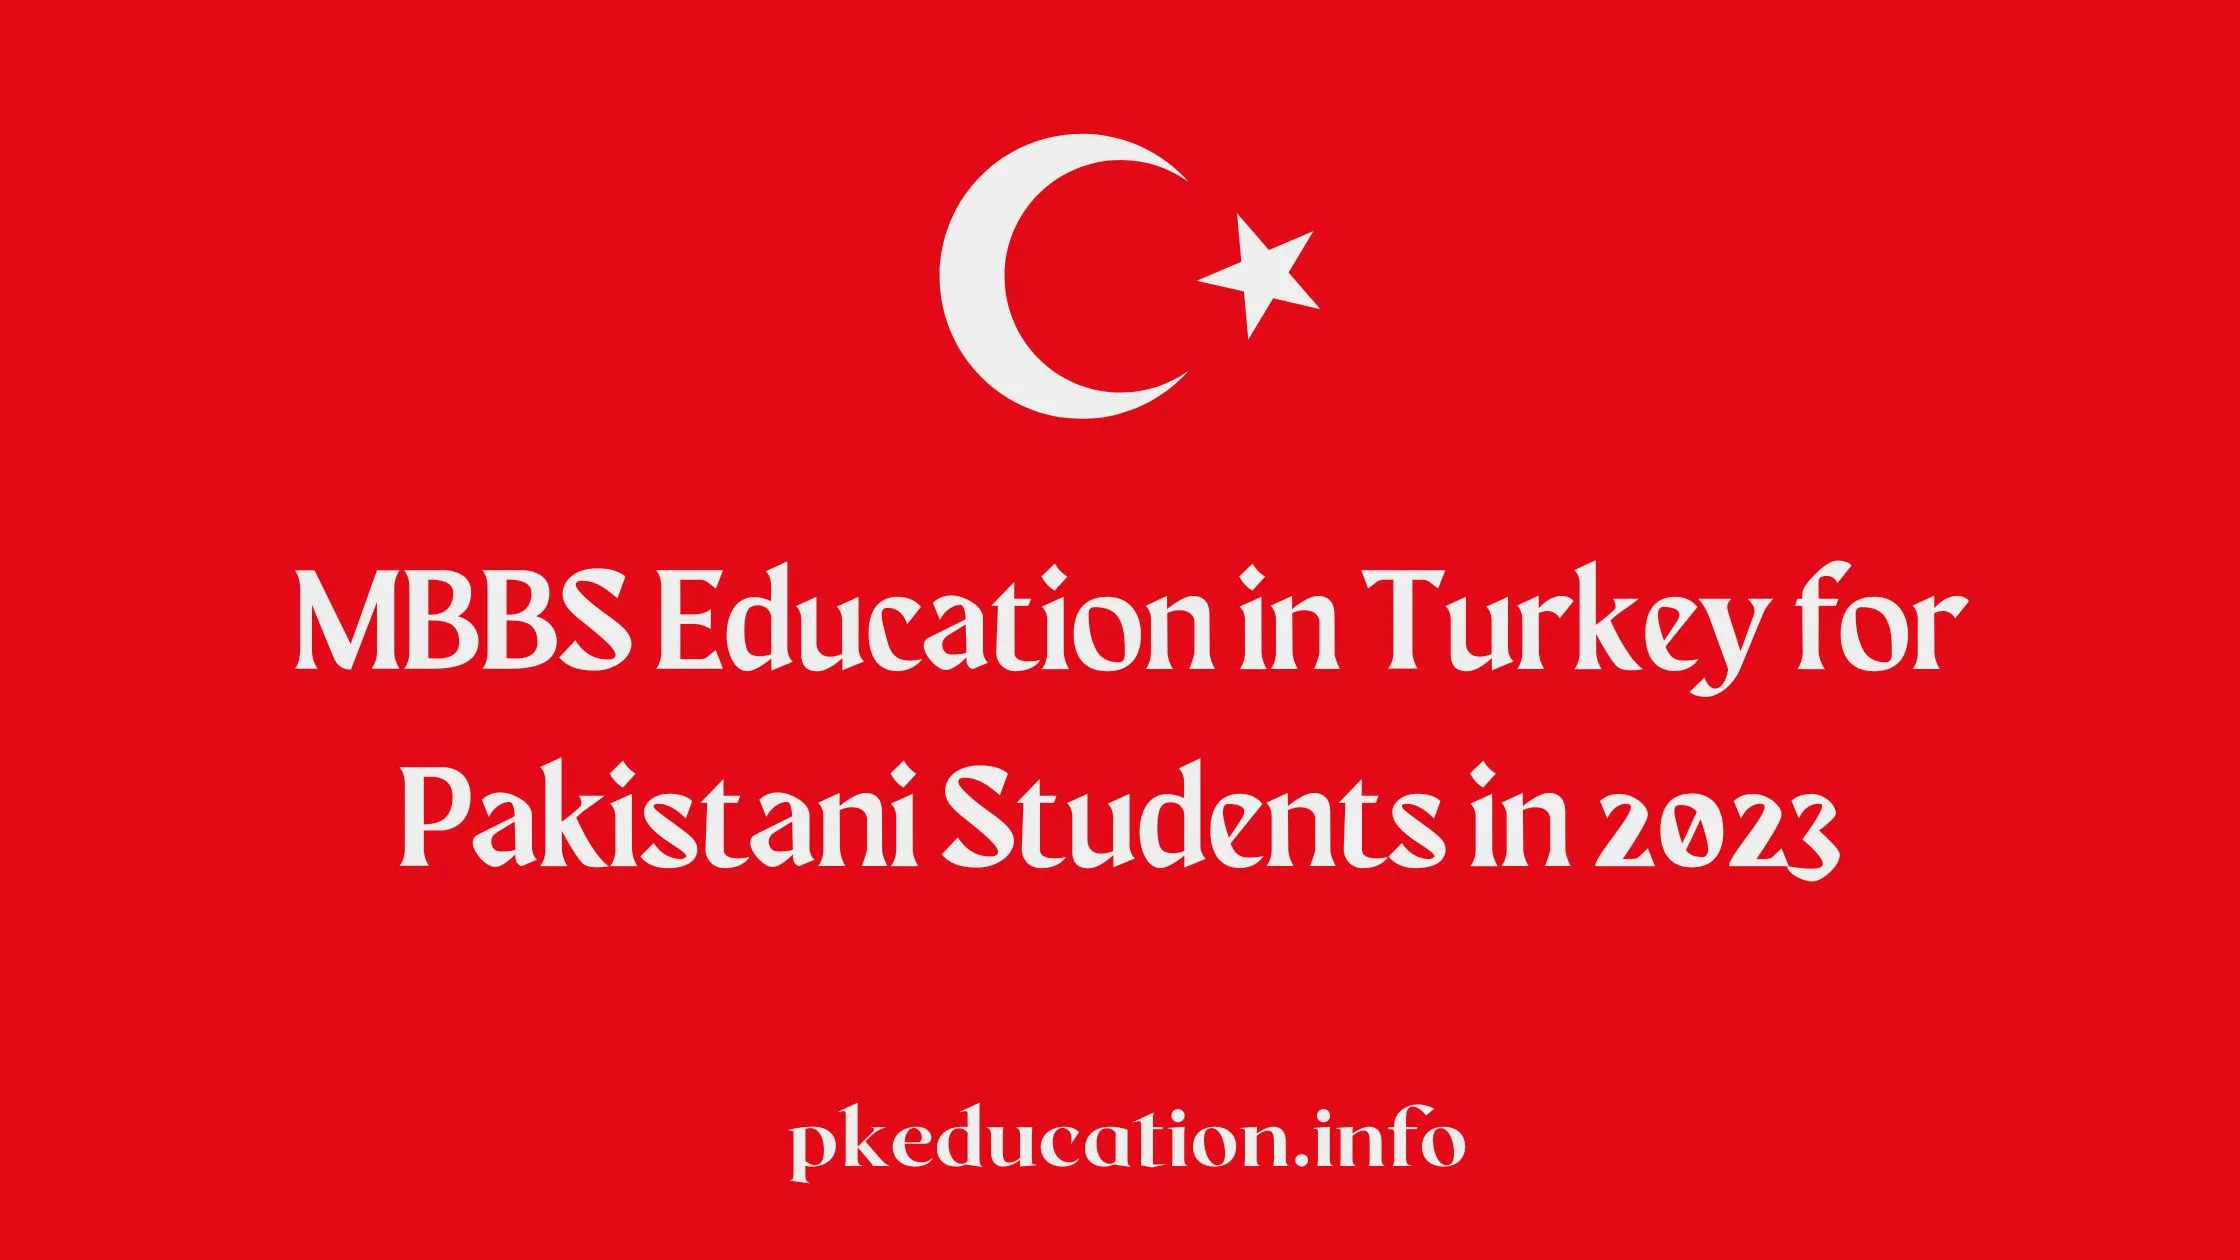 MBBS Education in Turkey for Pakistani Students in 2023